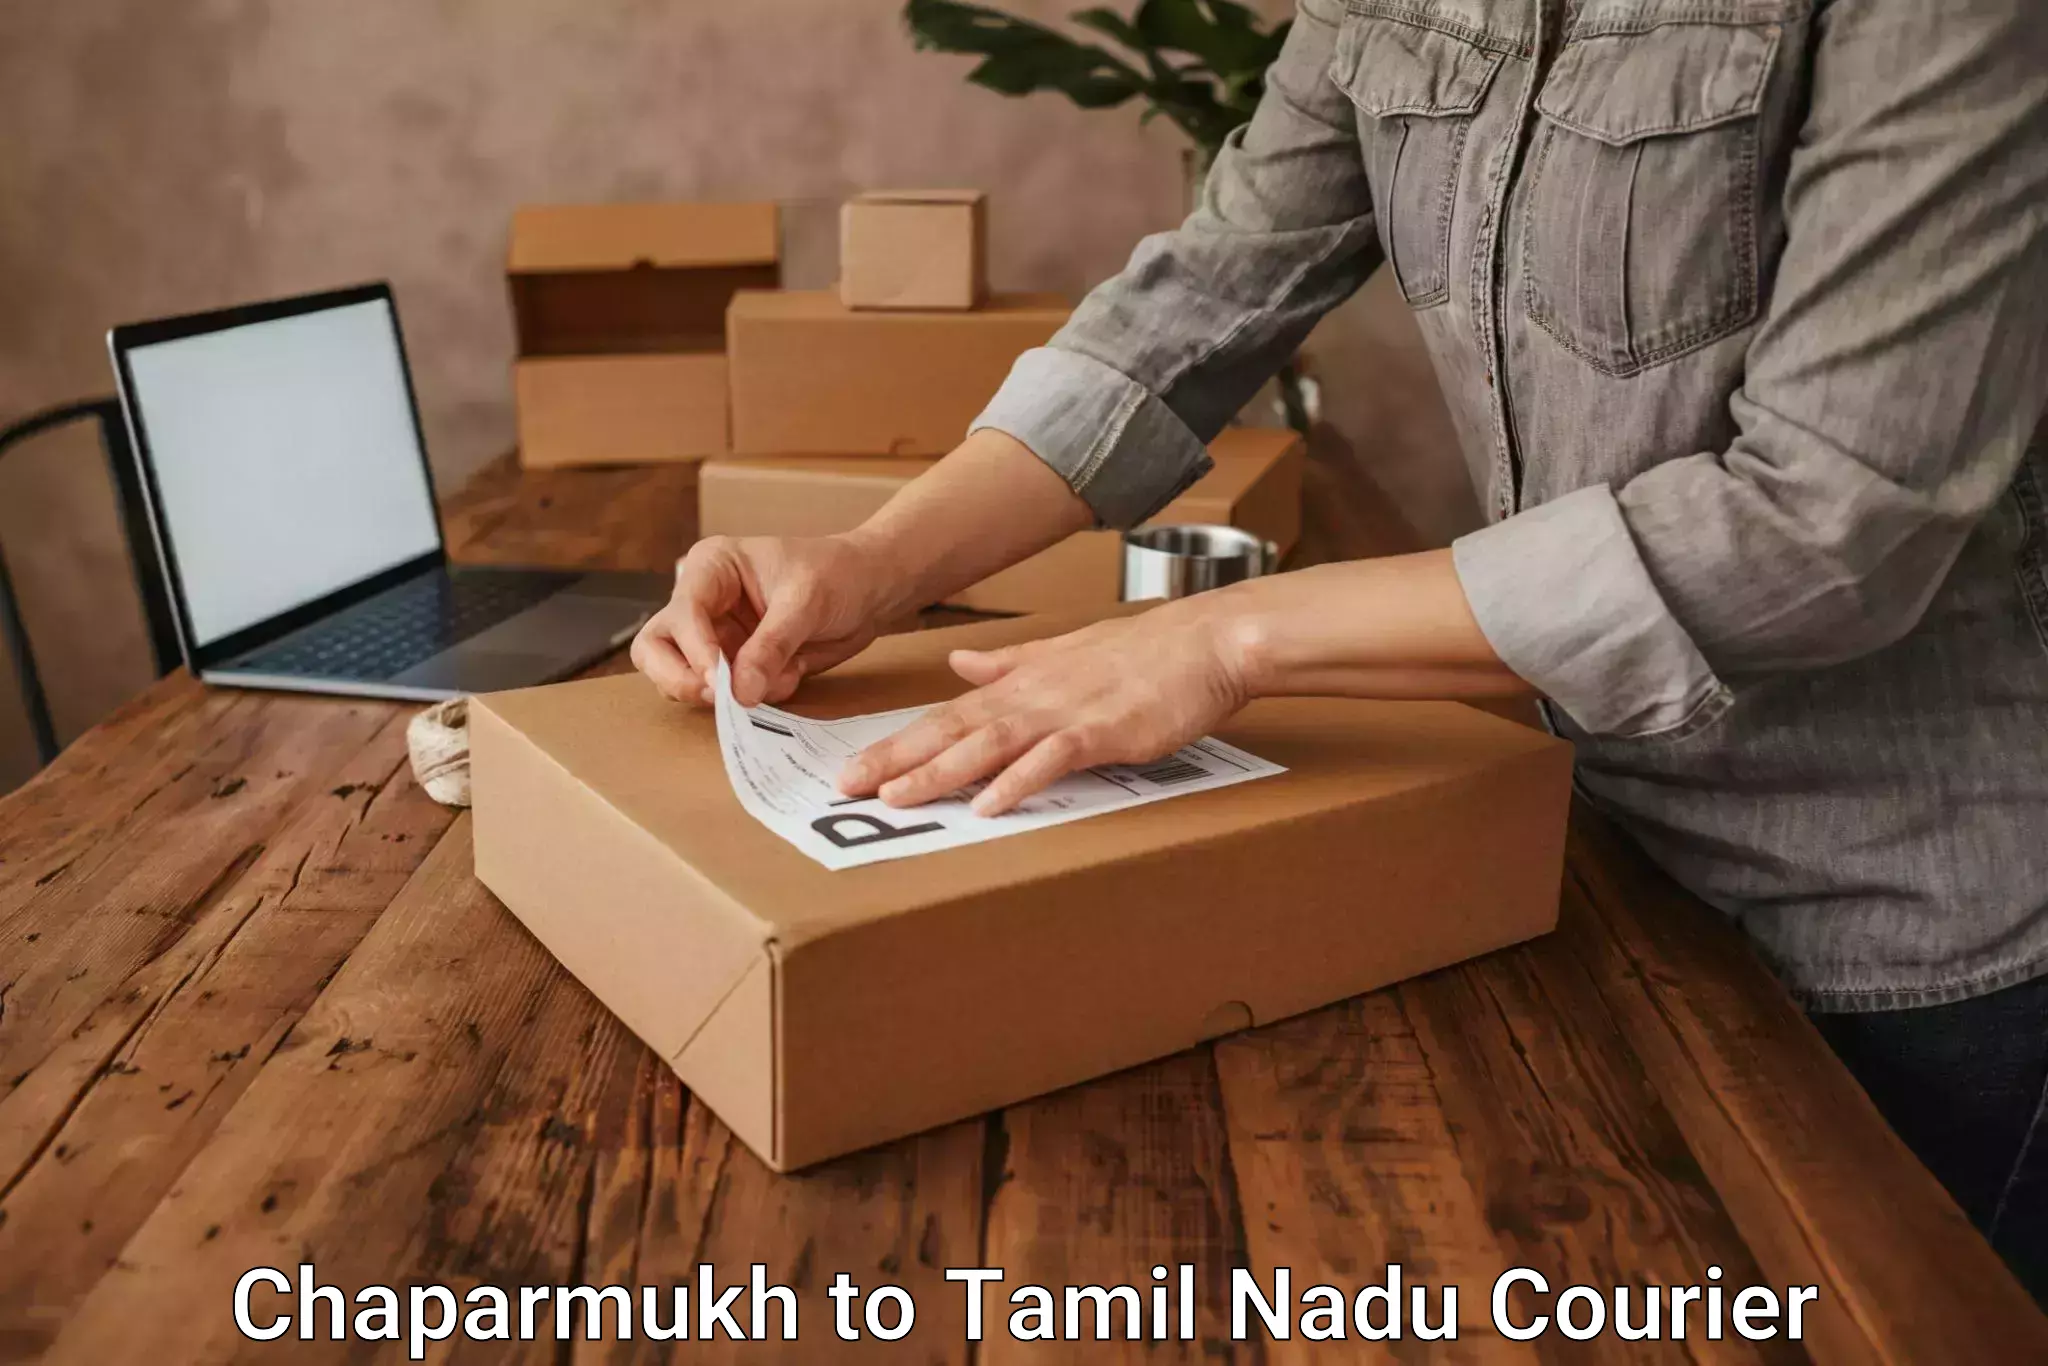 Custom courier packaging Chaparmukh to Tamil Nadu